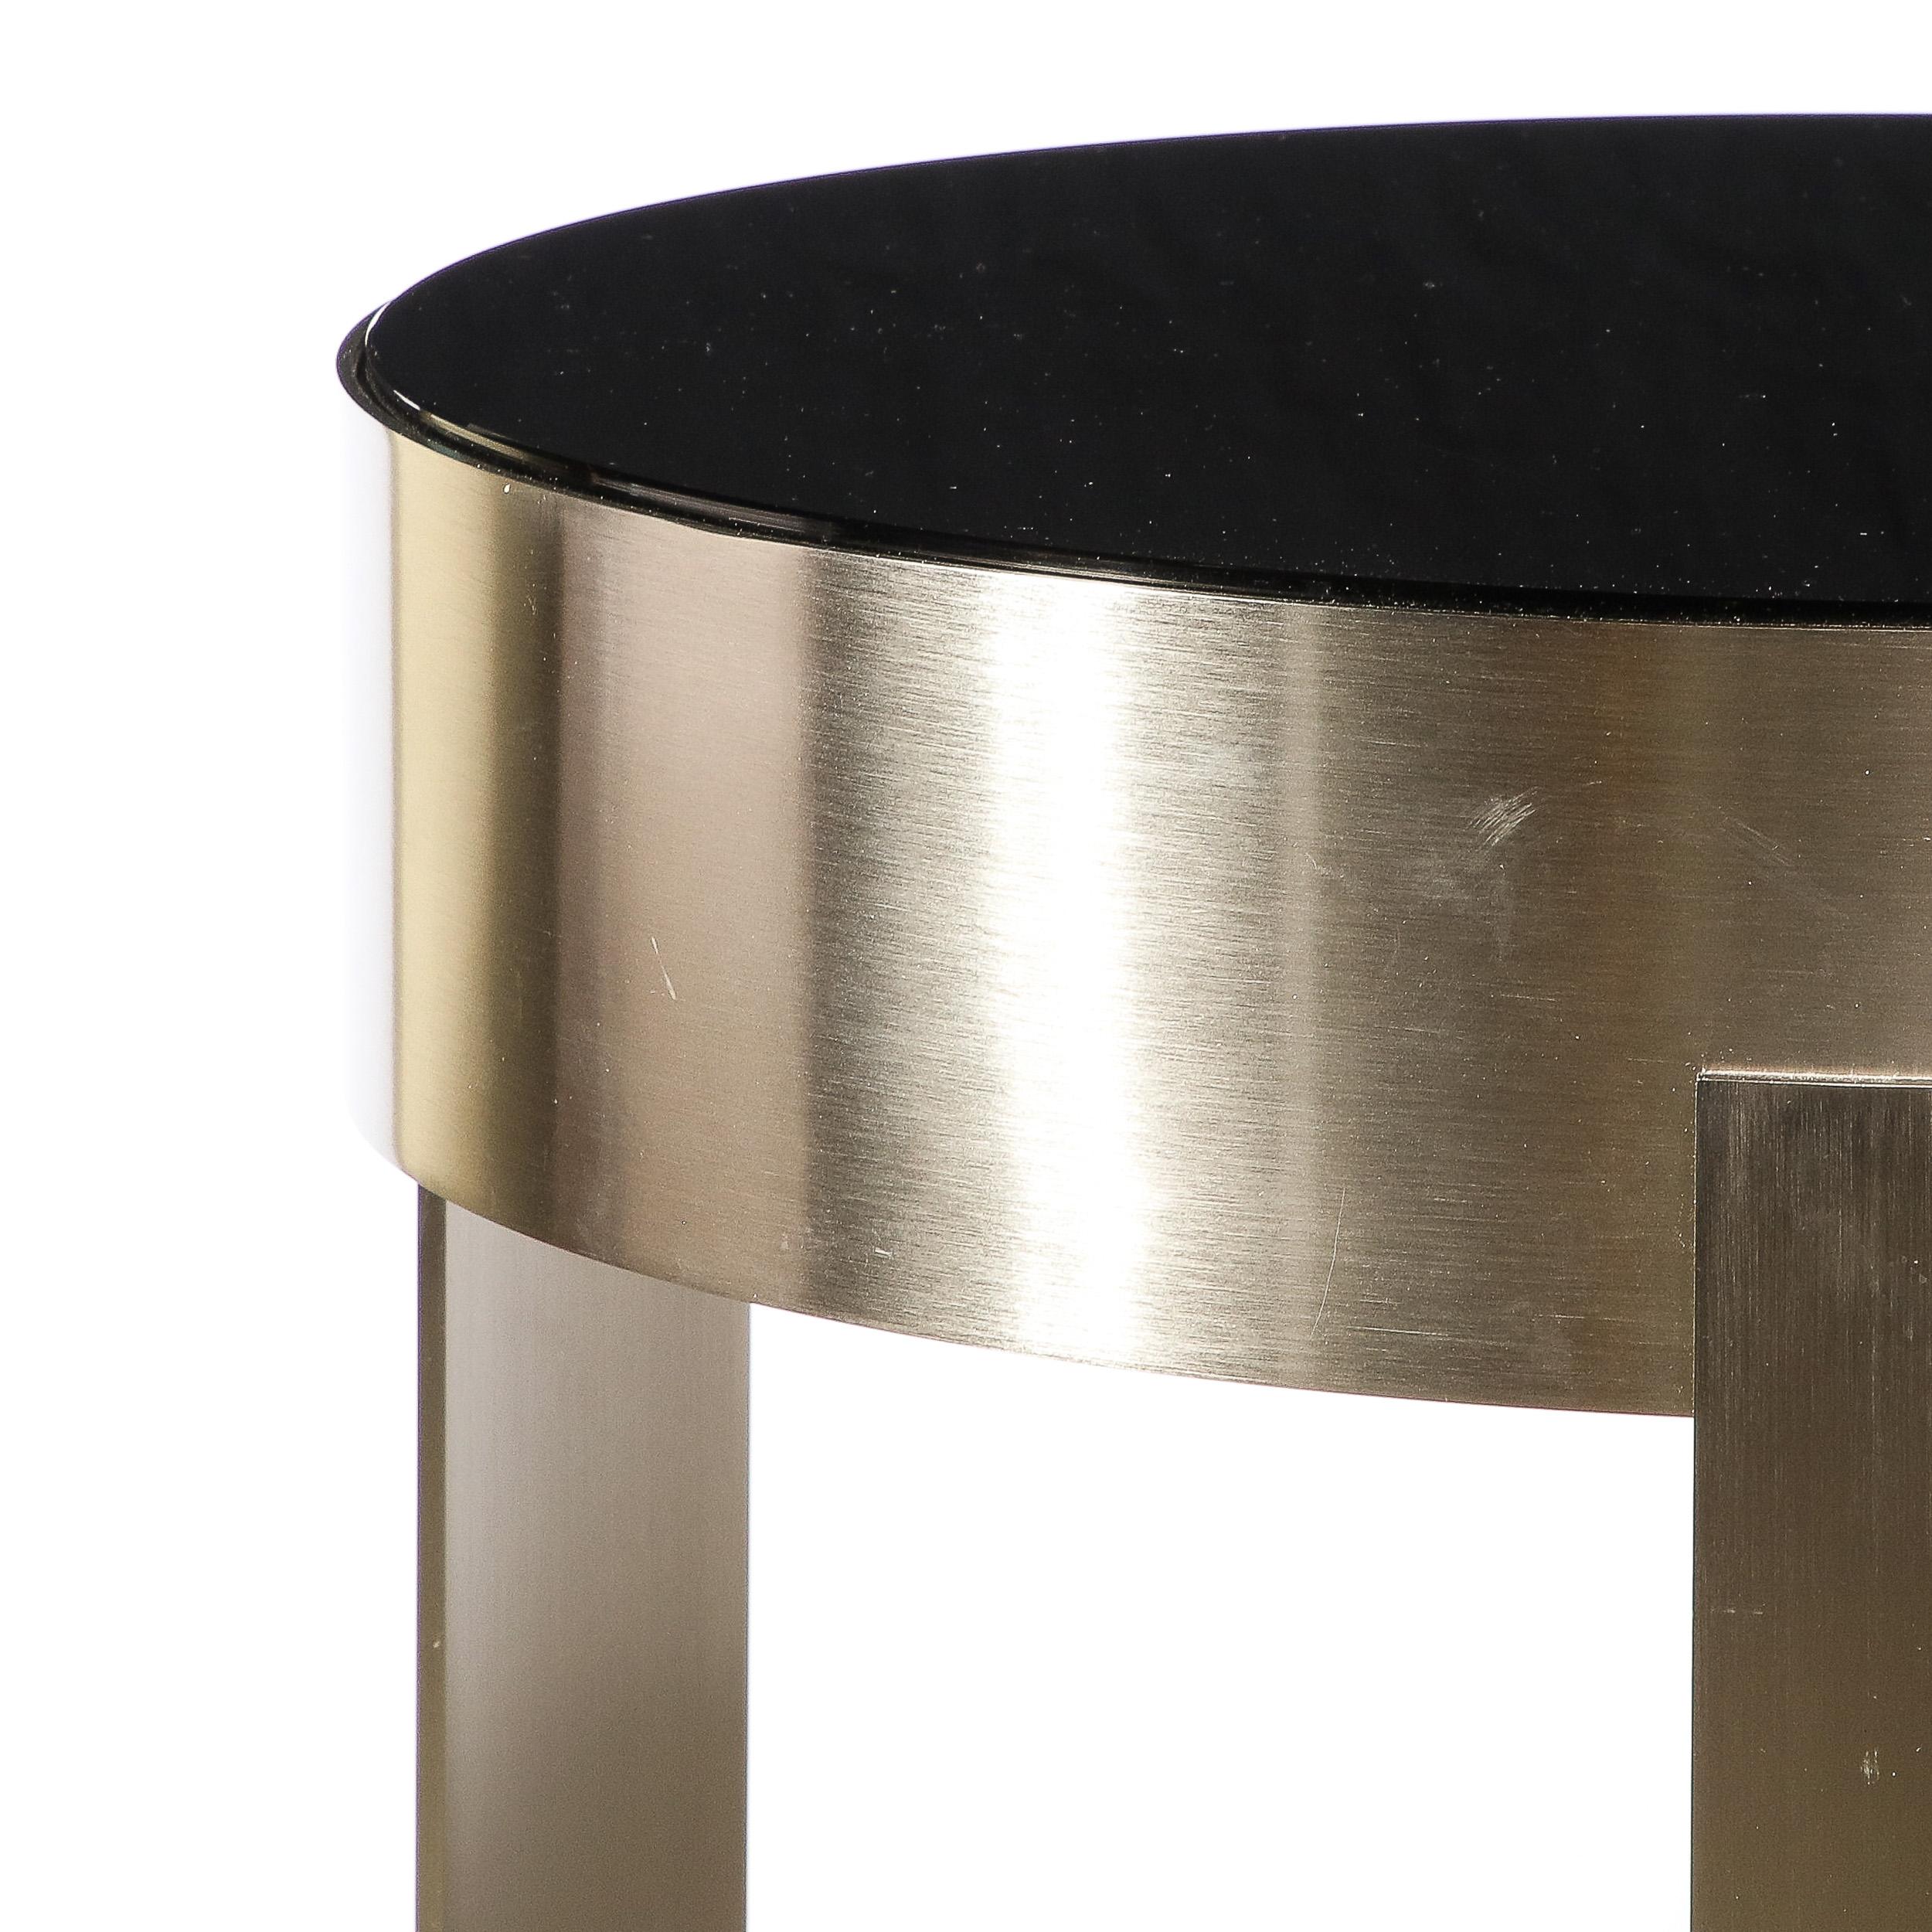 Art Deco Revival Occasional Table in Brushed Nickel with Polished Banding 1